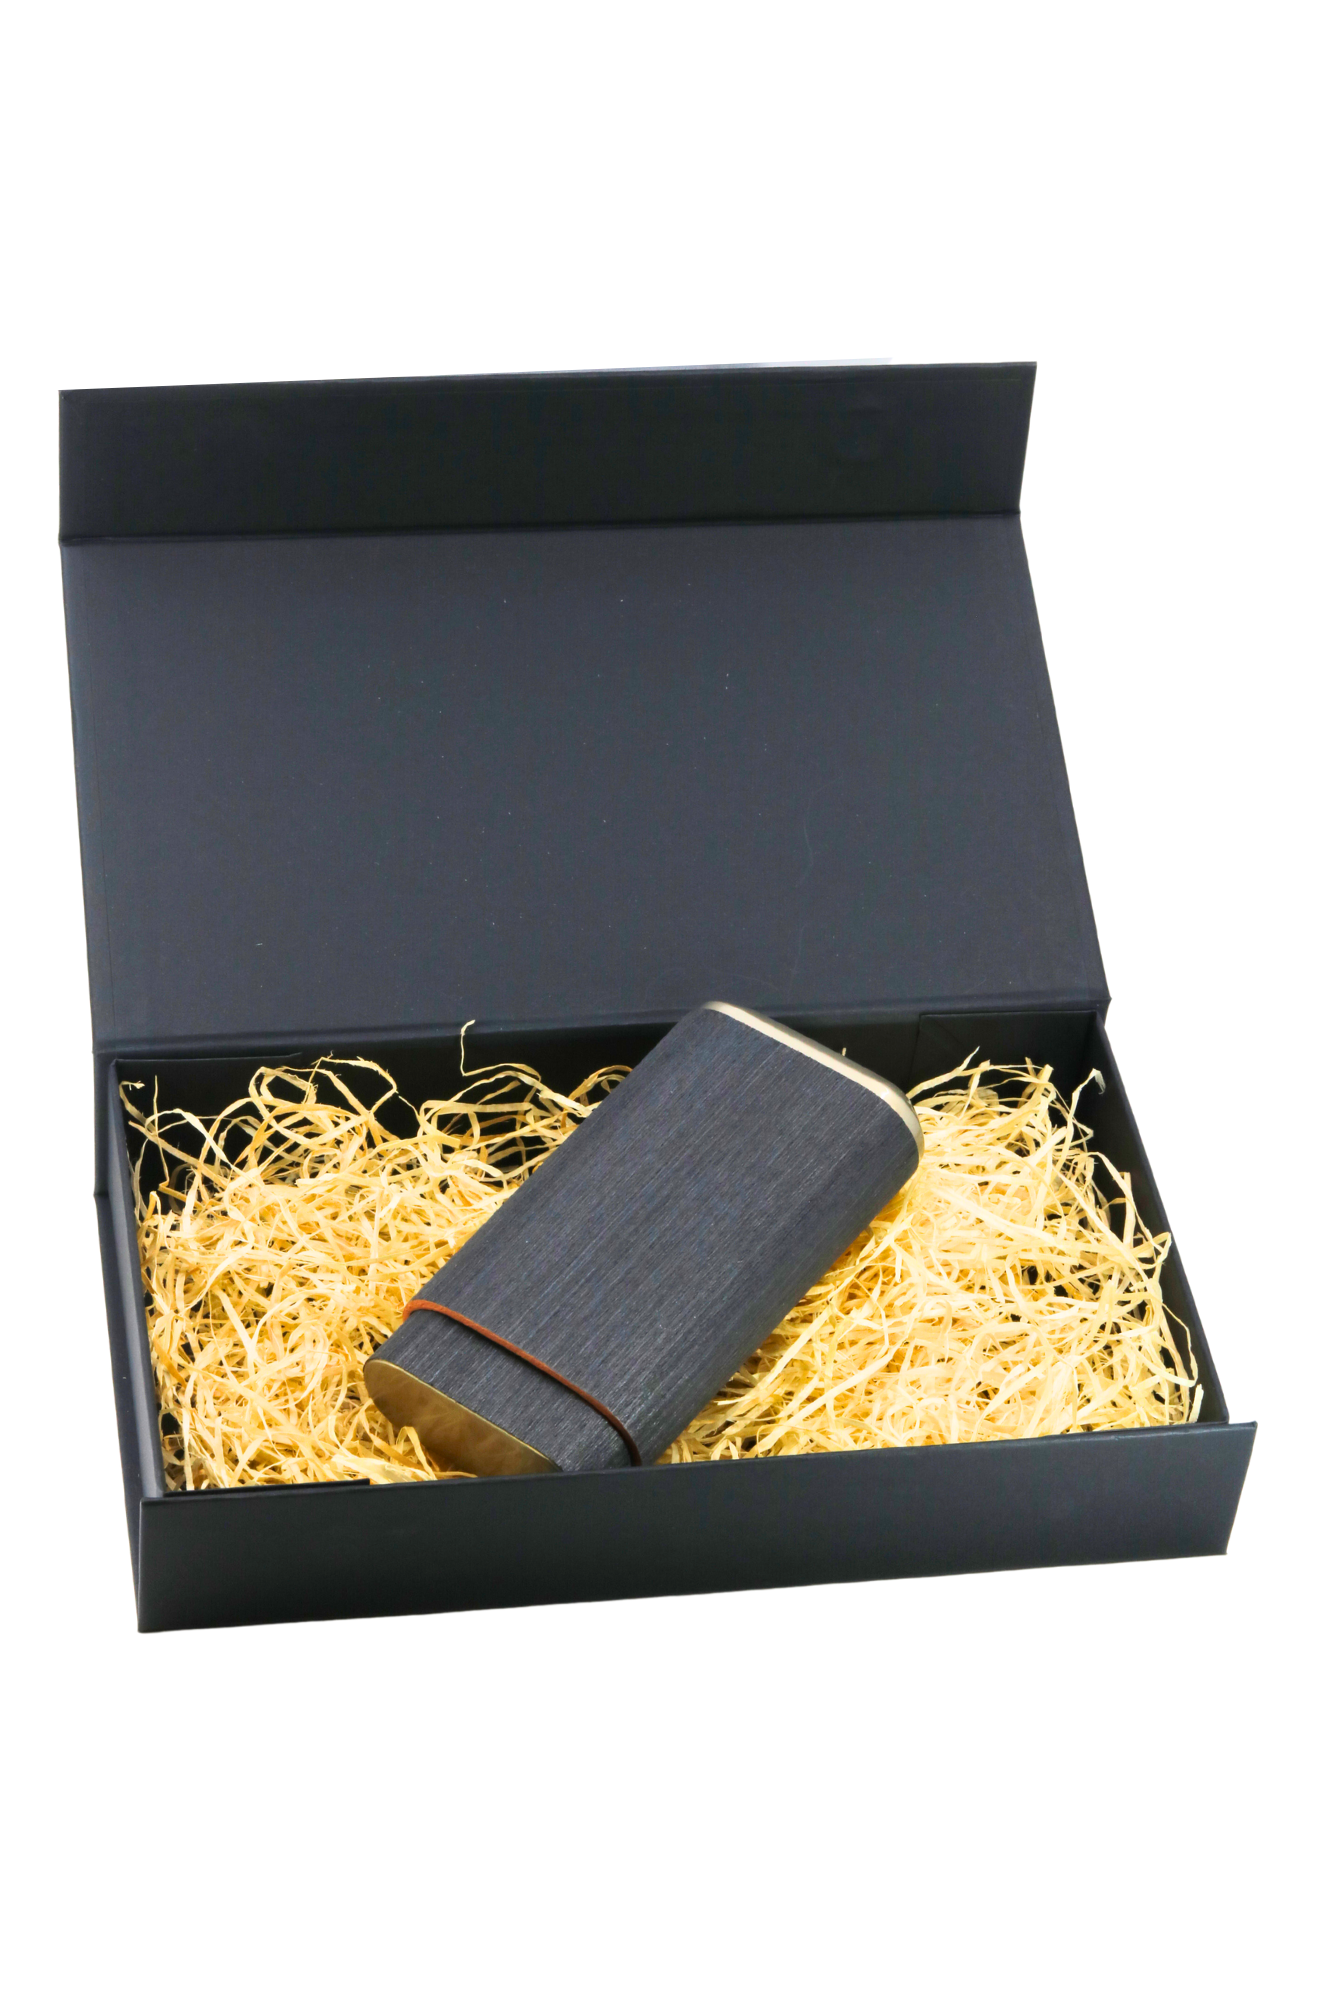 Angelo Lined Cigar Case - 3 Cigars